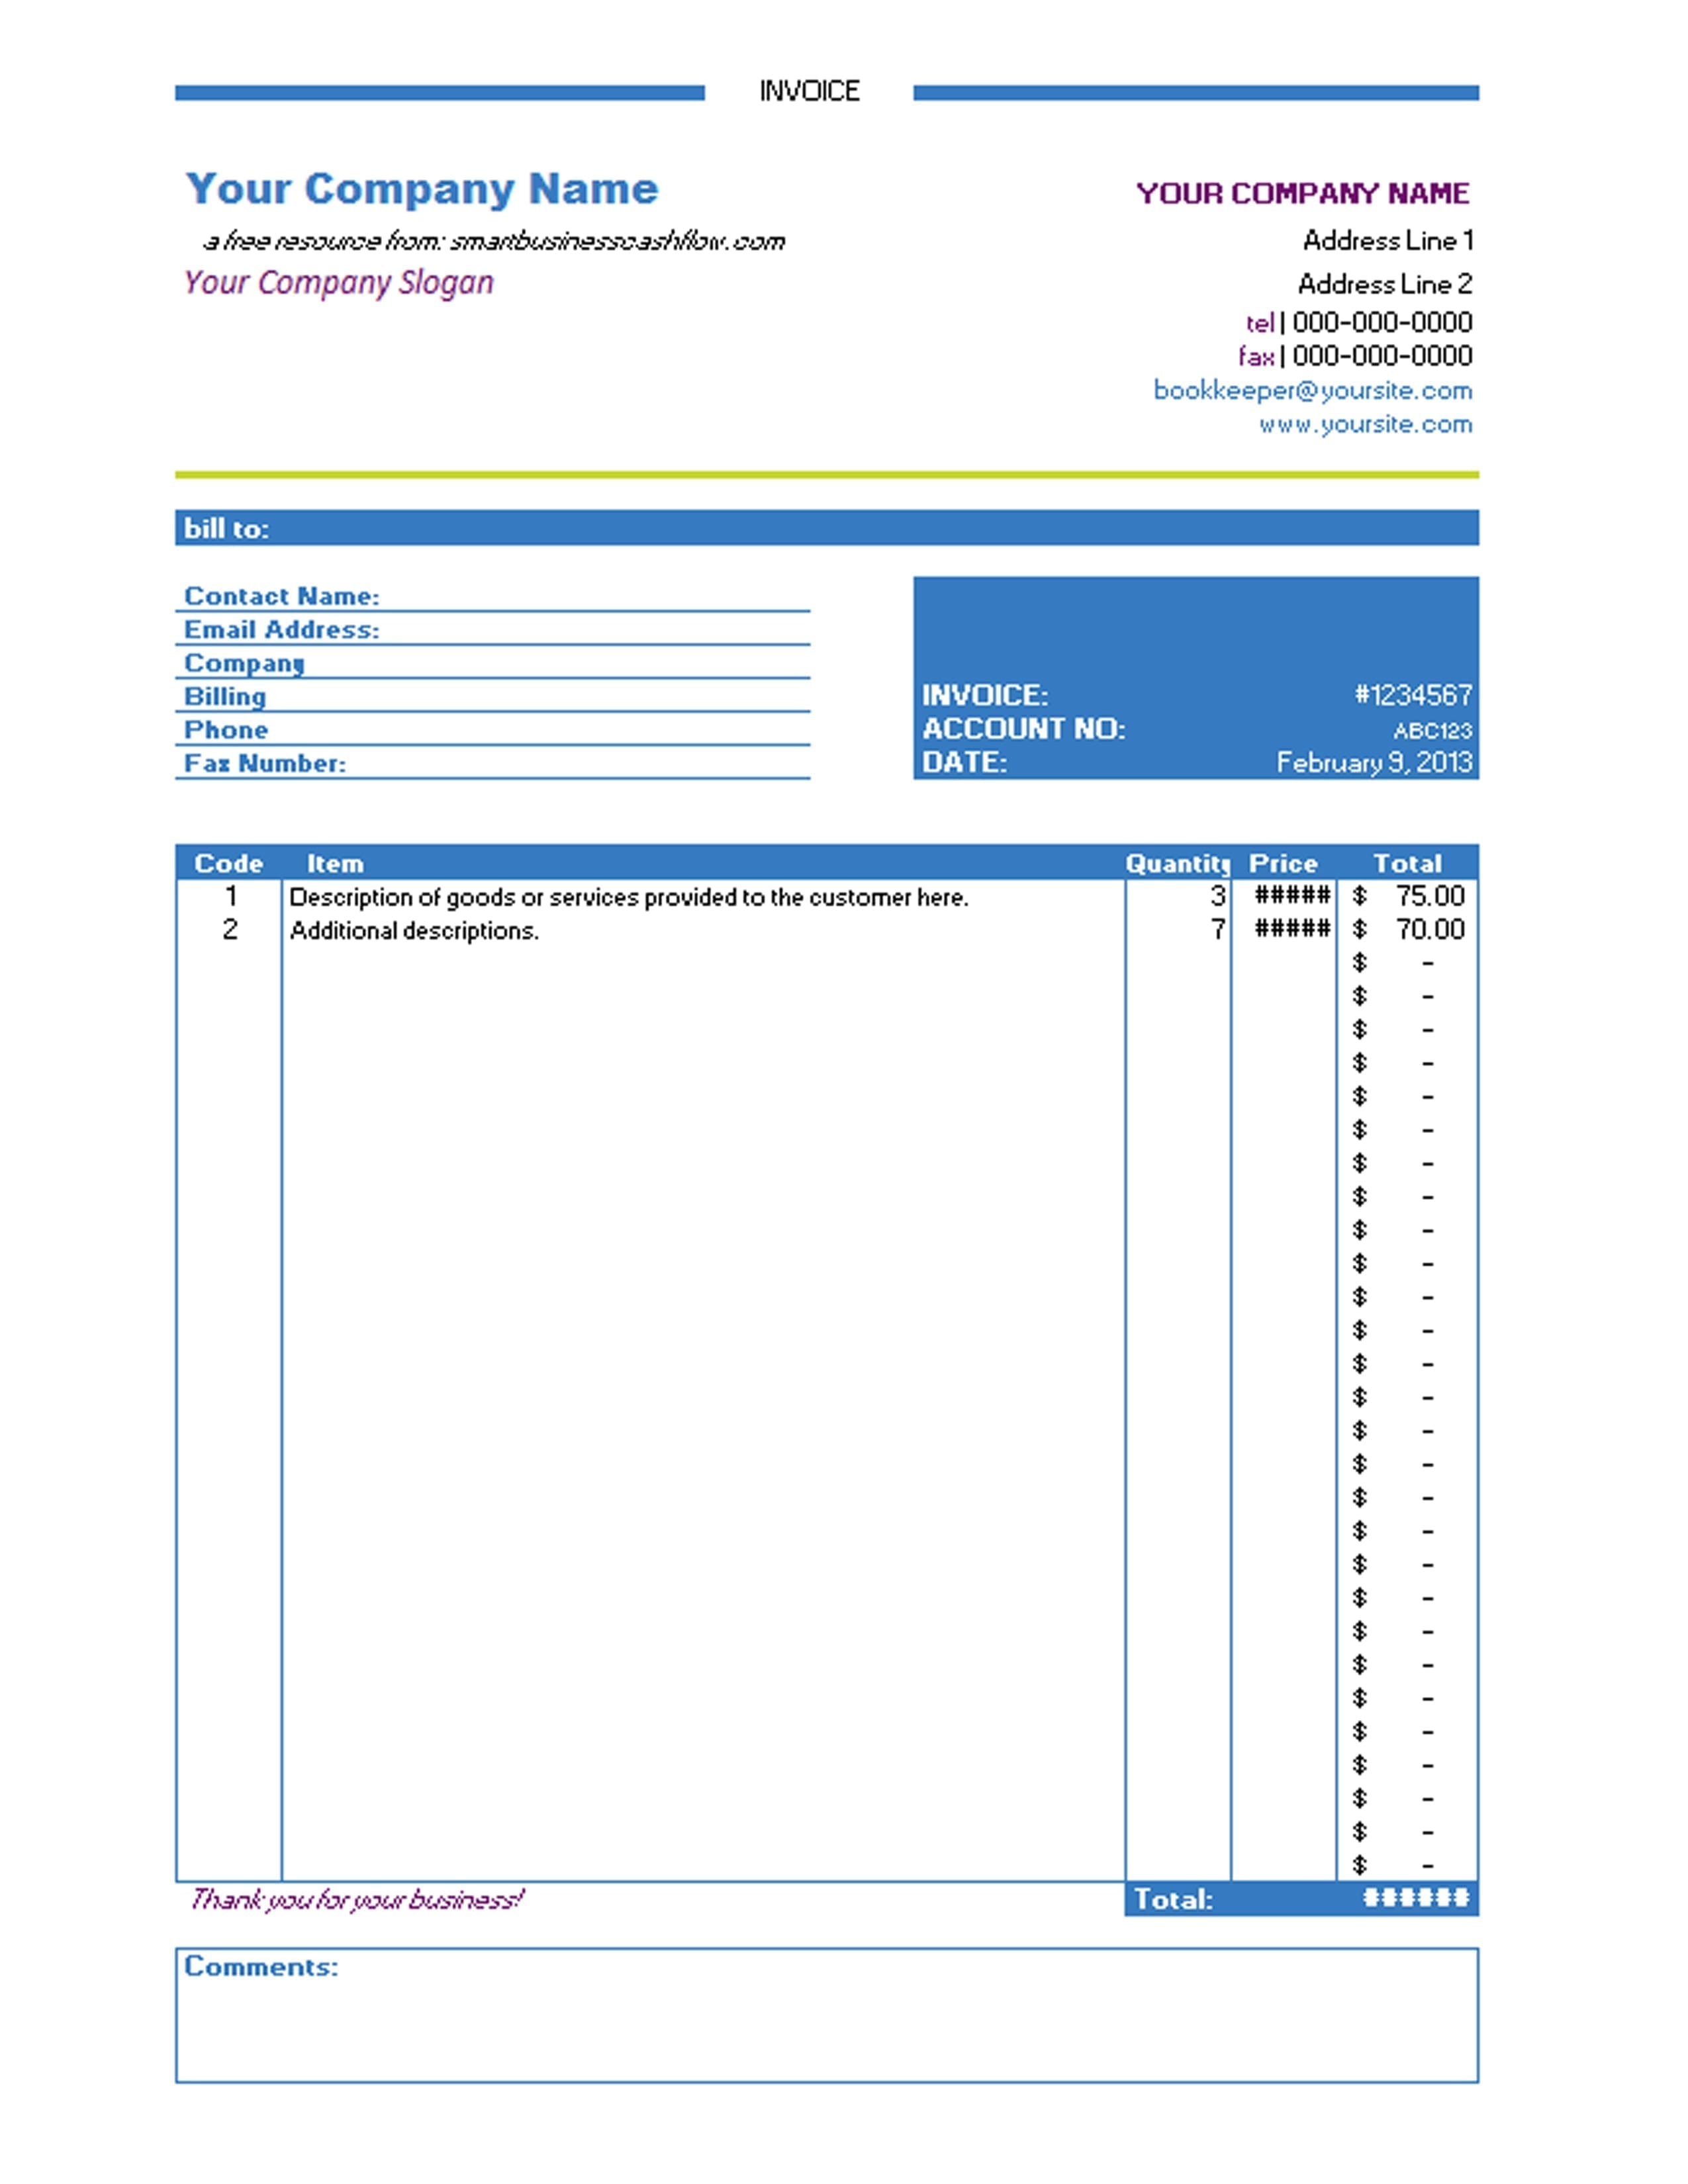 templates for invoices excel